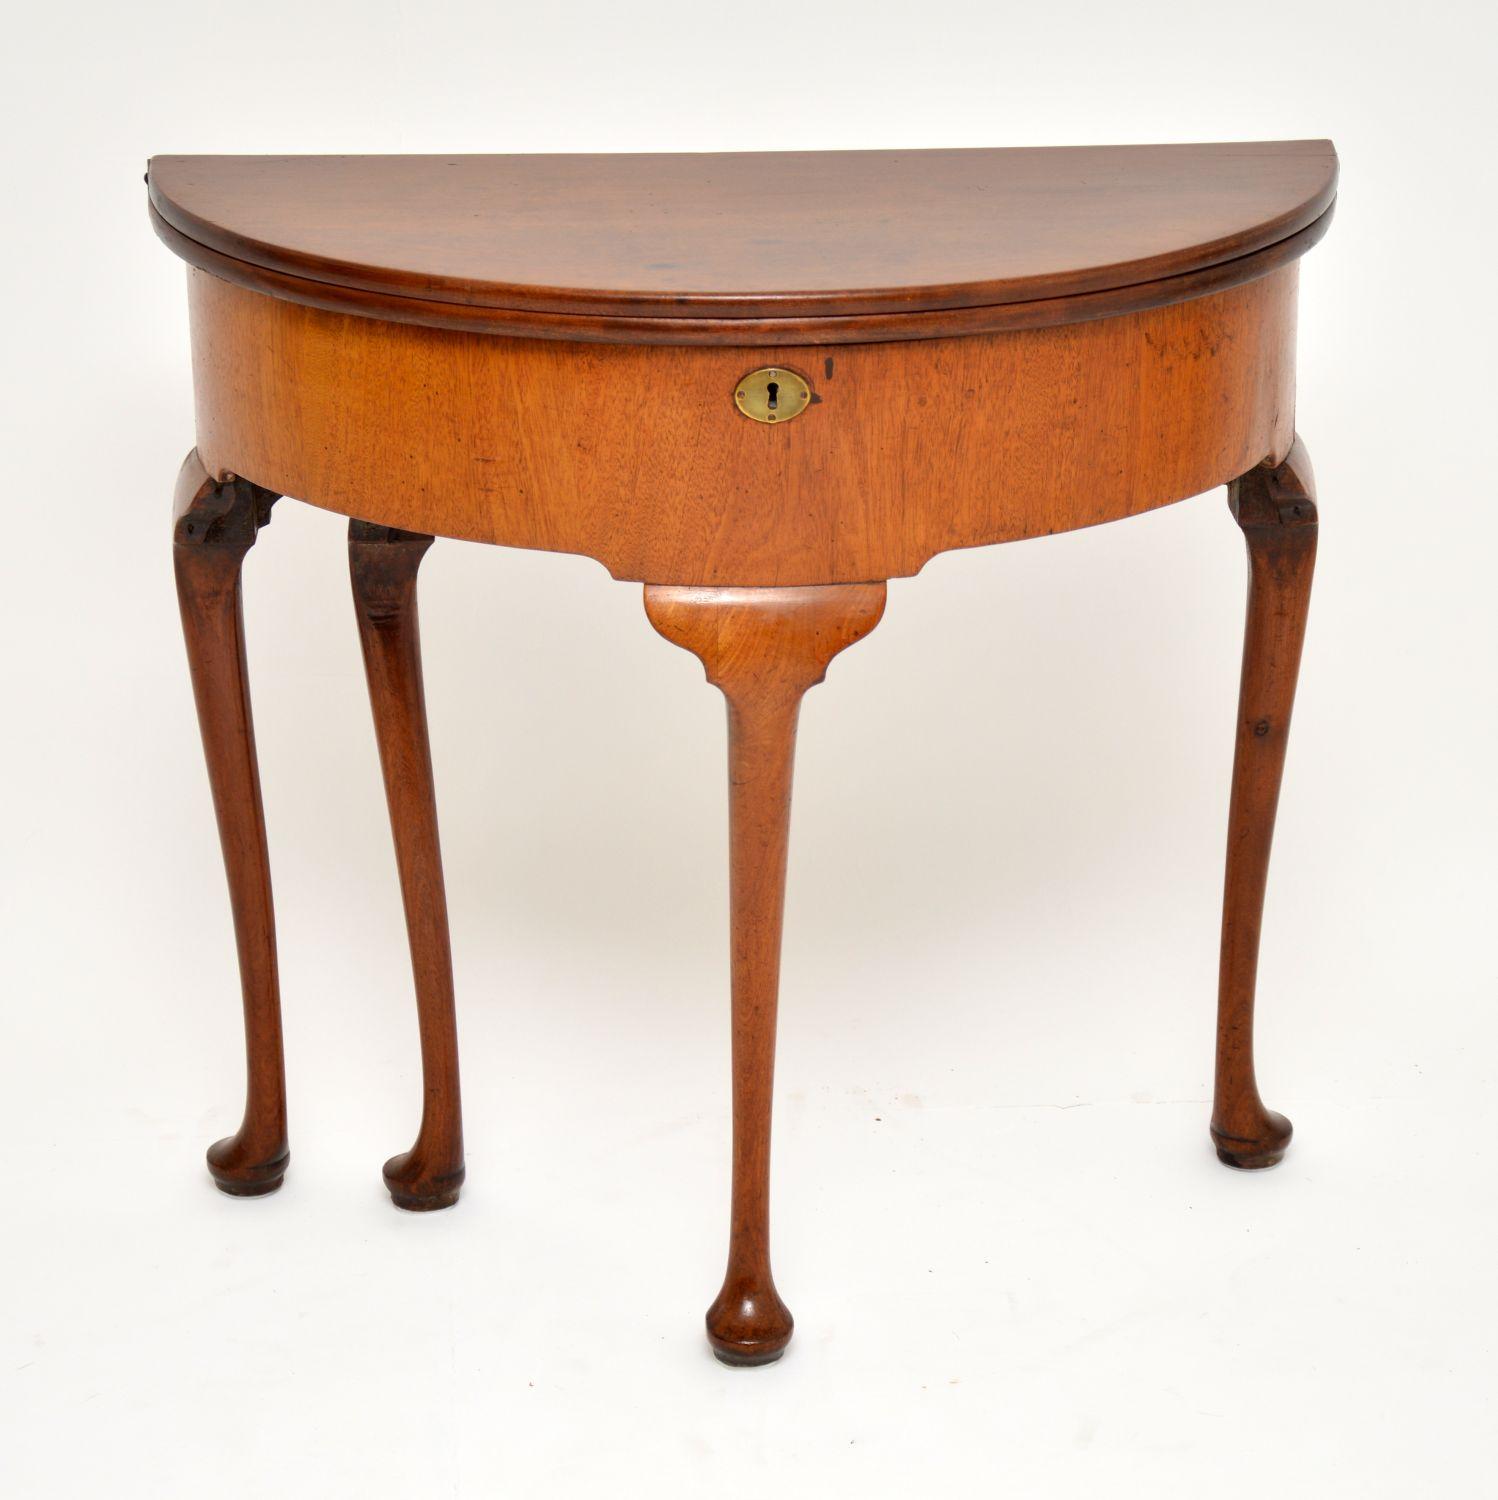 Antique George II mahogany tea table dating from circa 1750s and in very good original condition and with a wonderful color. Originally, these tables were generally put out of the way and brought out to serve tea on, hence the name. This table has